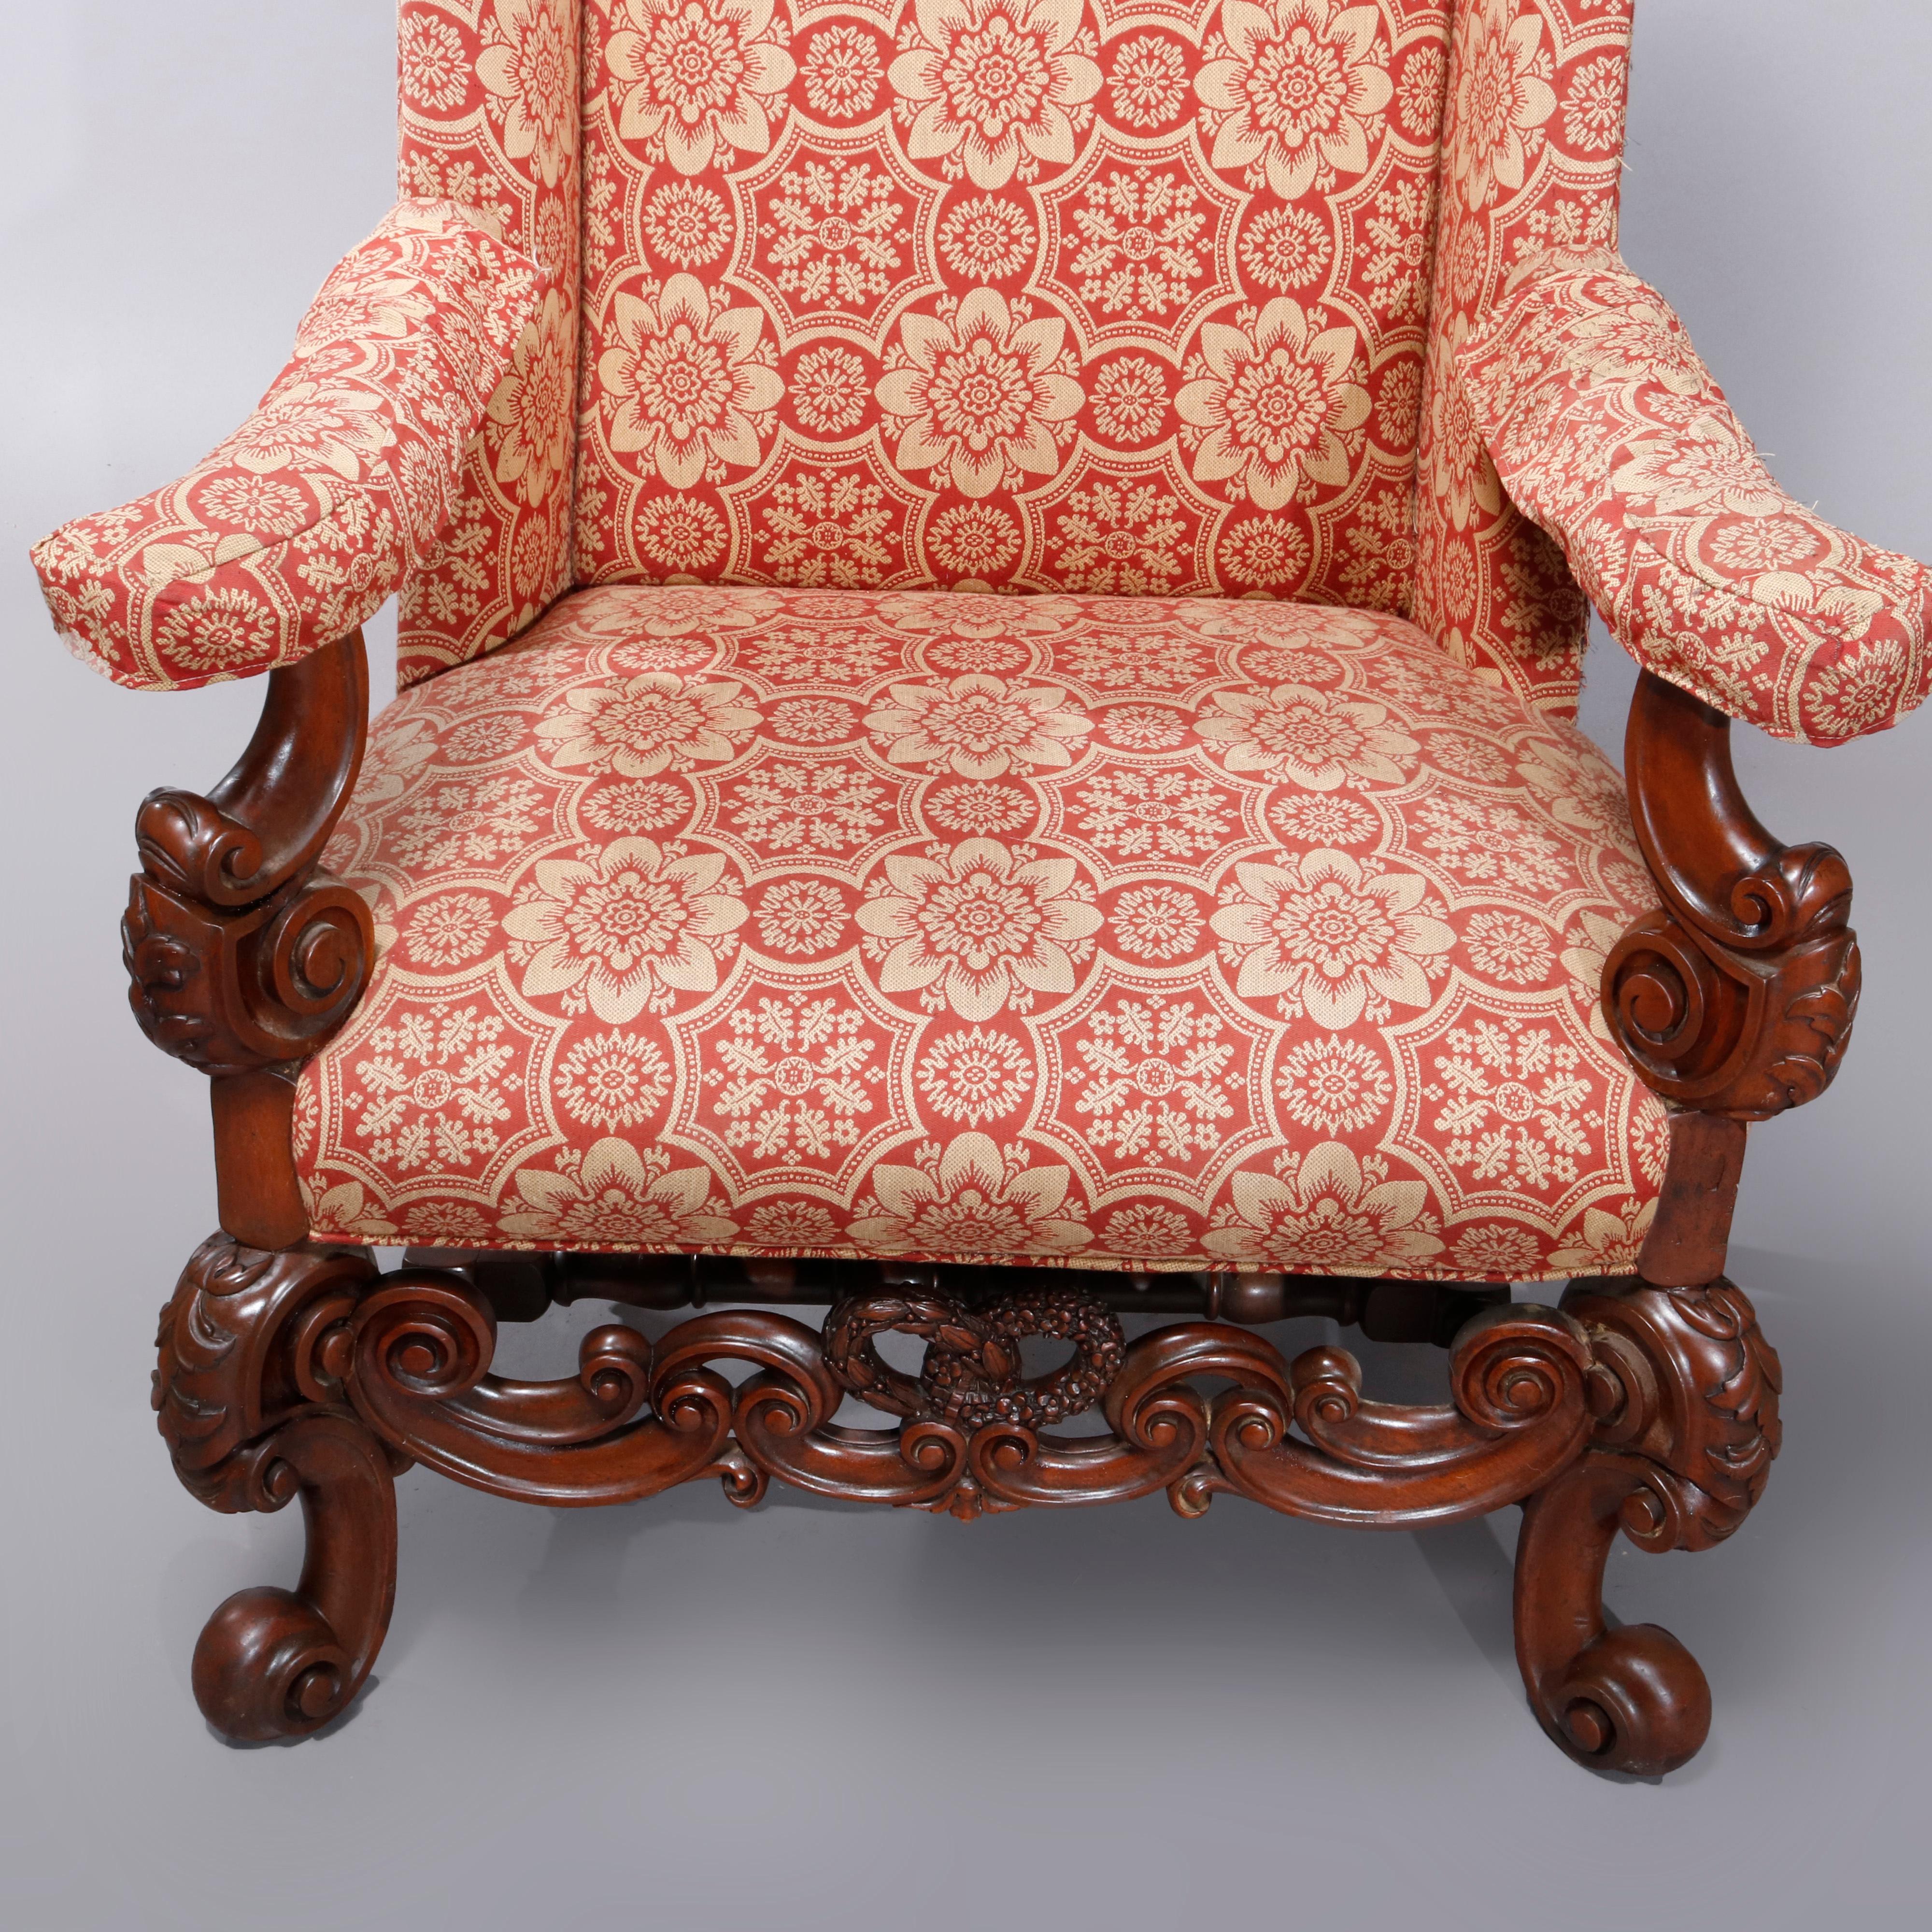 Antique Carved Walnut Continental Baroque Upholstered Tall Fireside Chairs 2